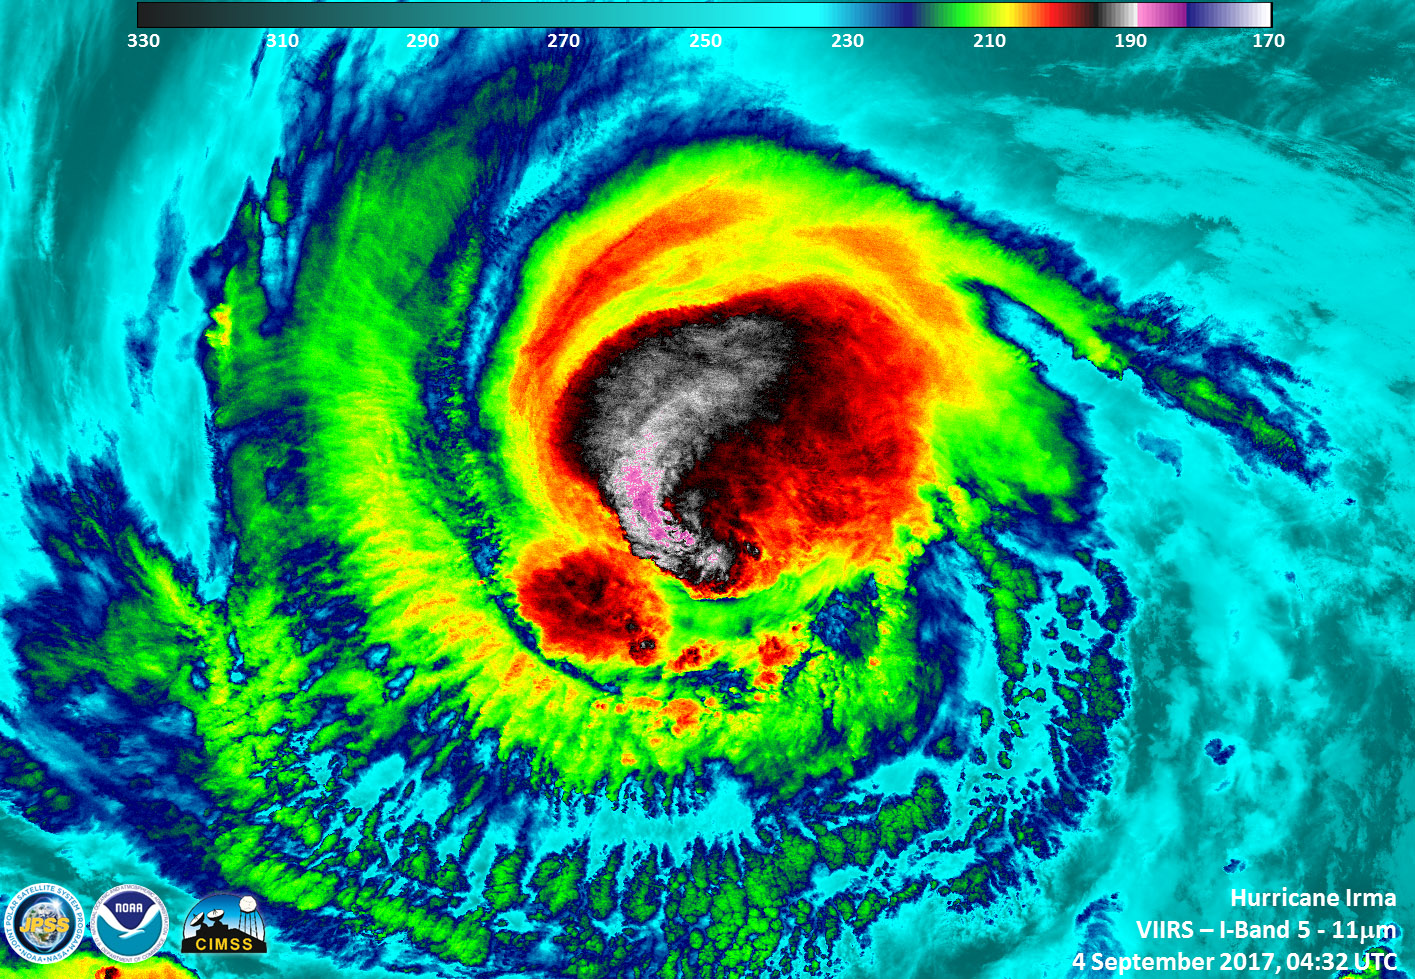 Satellite image of Irma, with clouds colored red, yellow, black, and blue.